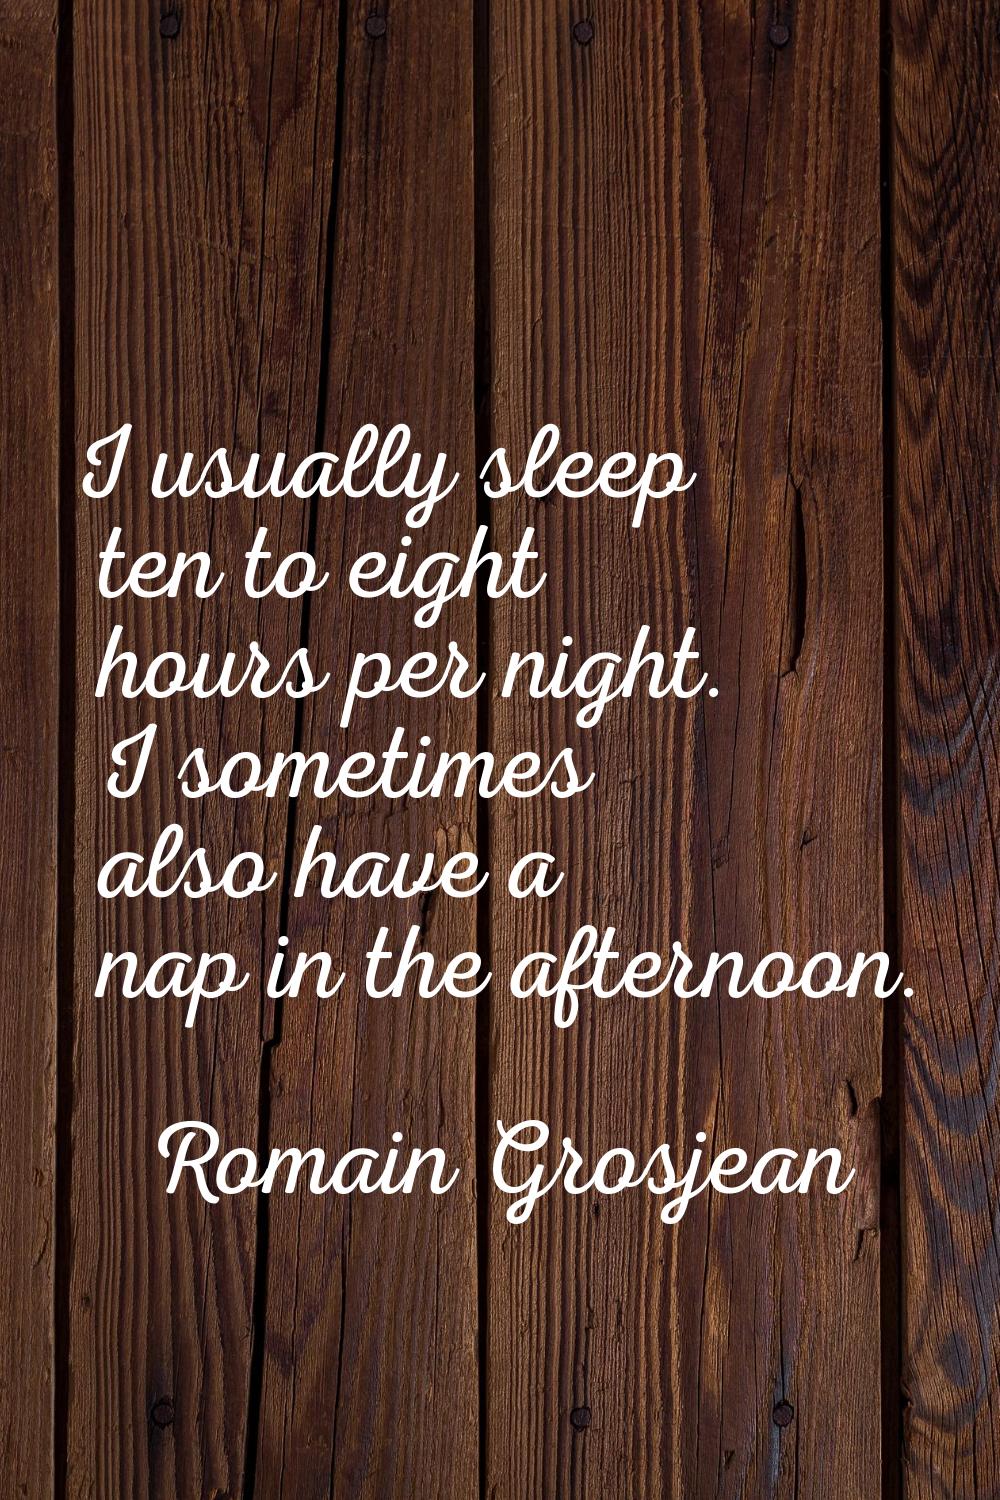 I usually sleep ten to eight hours per night. I sometimes also have a nap in the afternoon.